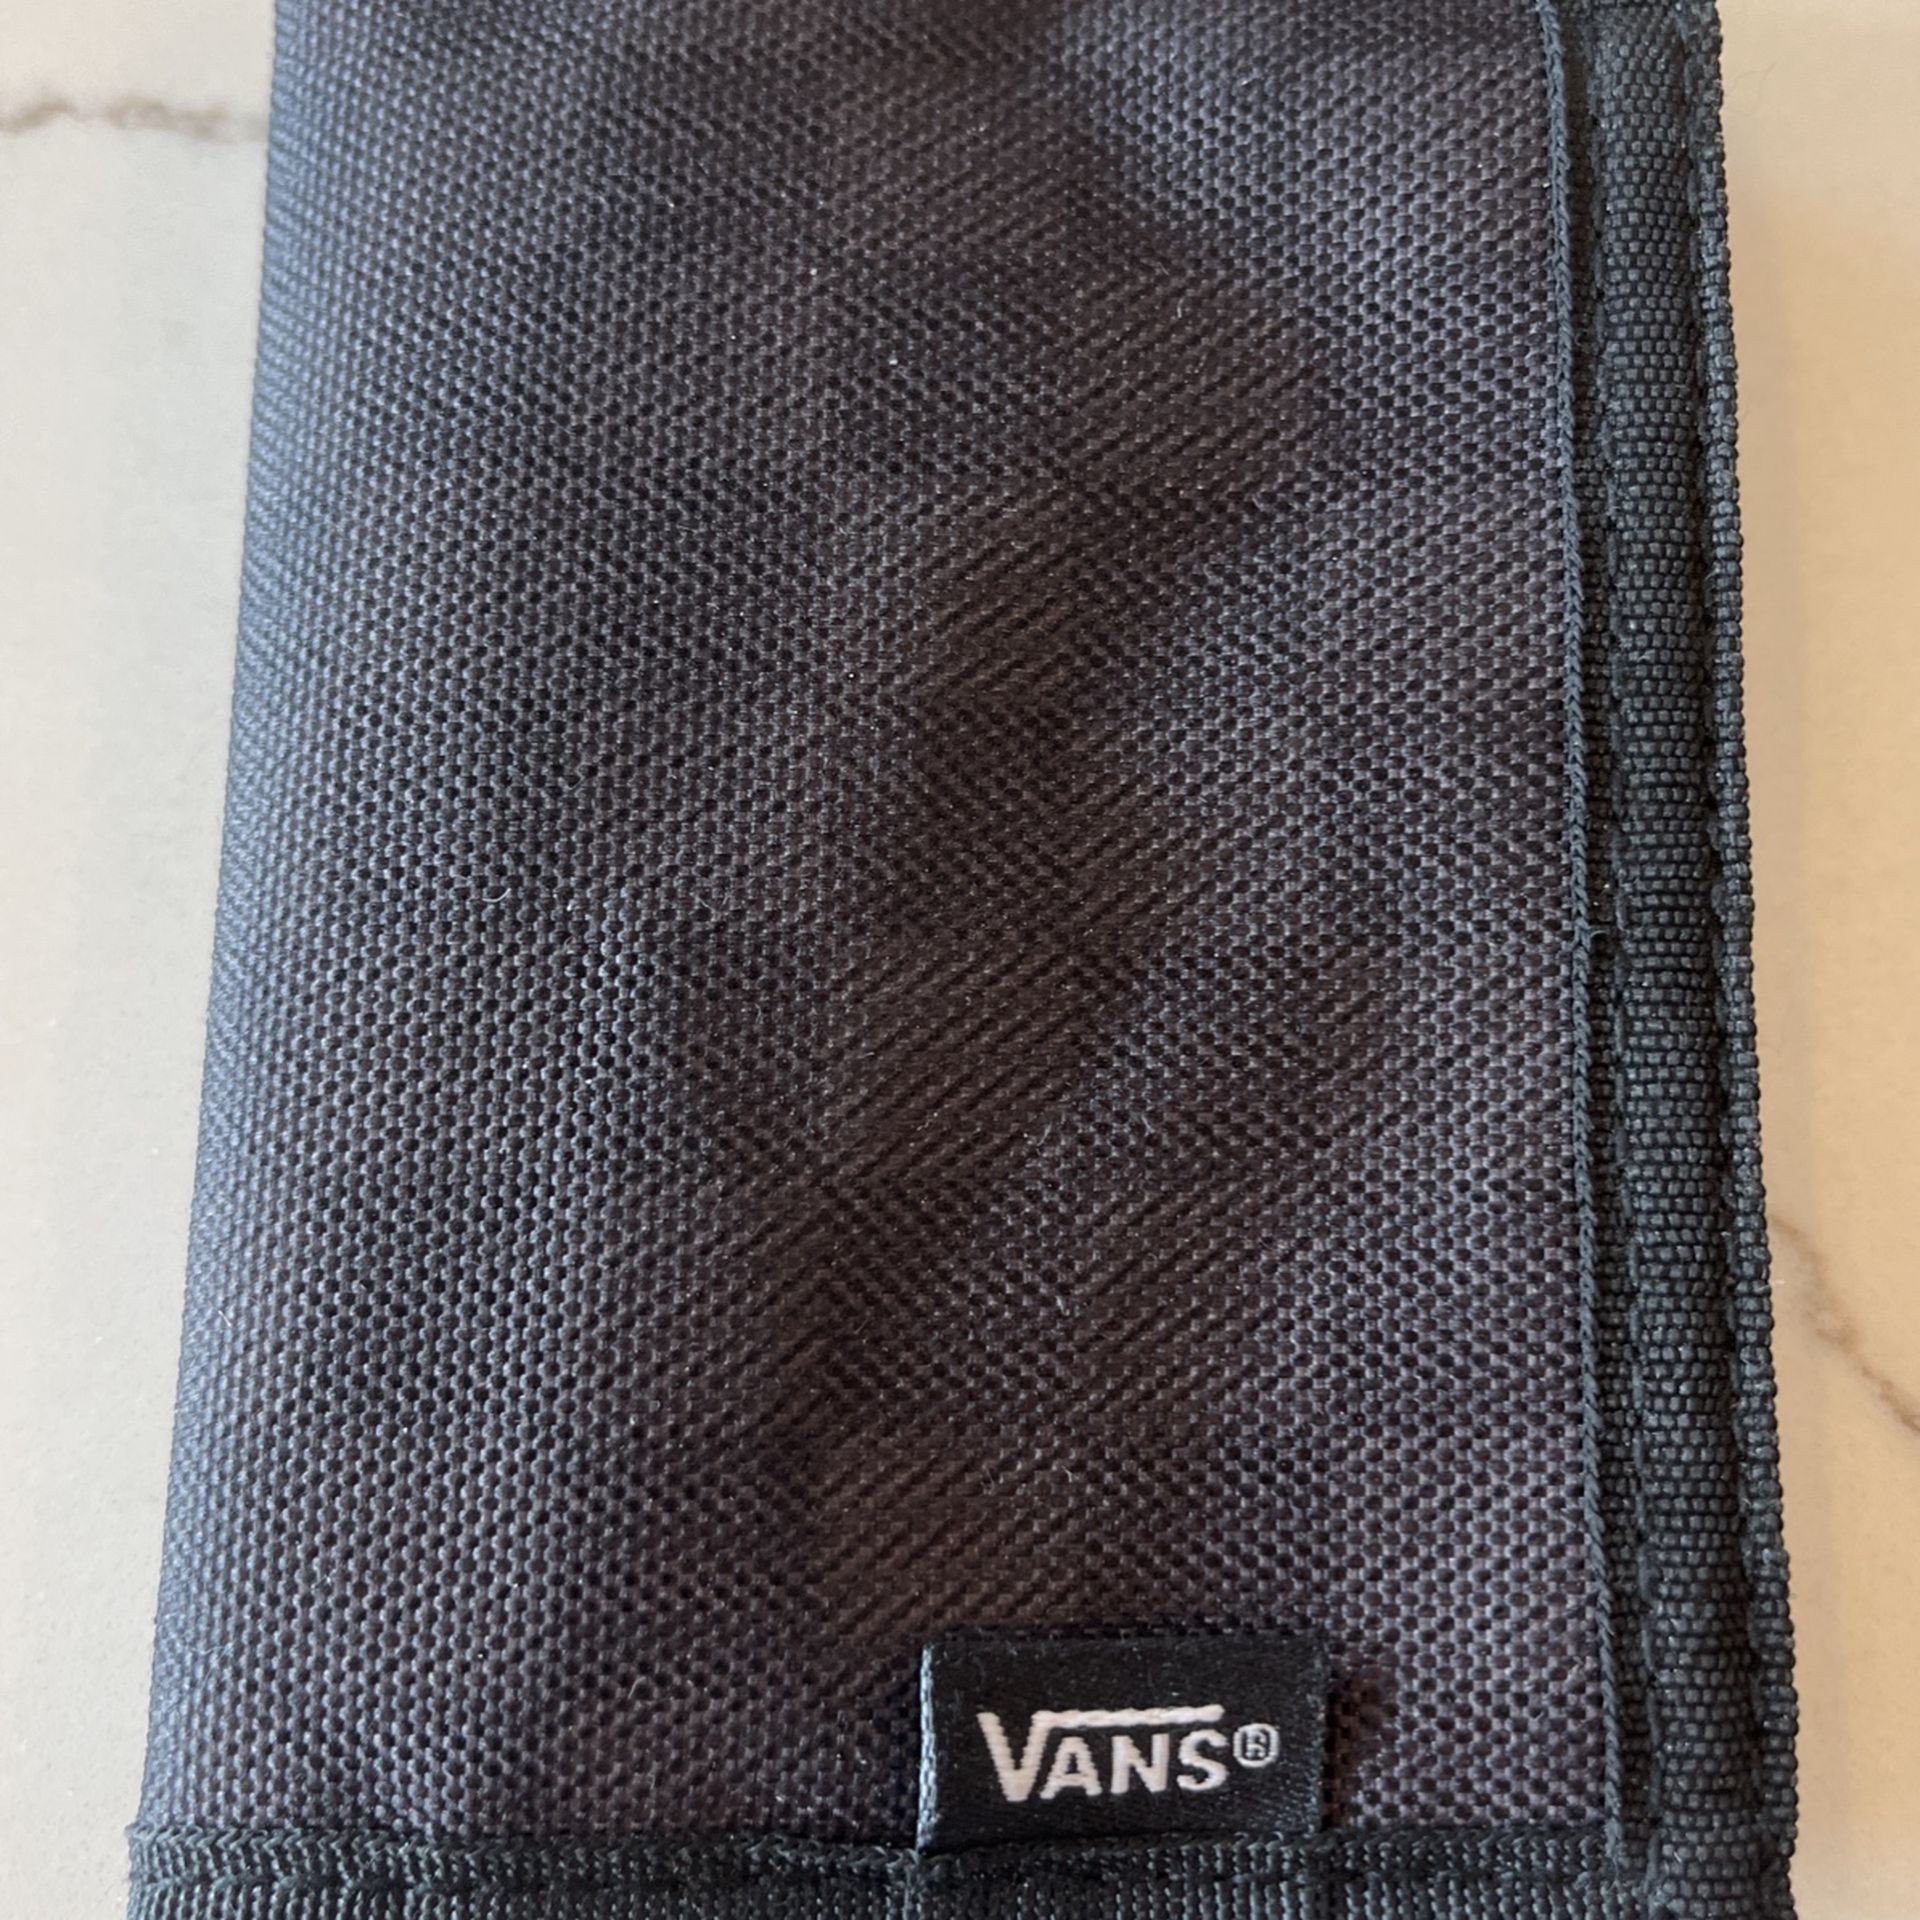 Vans Off The wall Black On Black Checkerboard velcro wallet